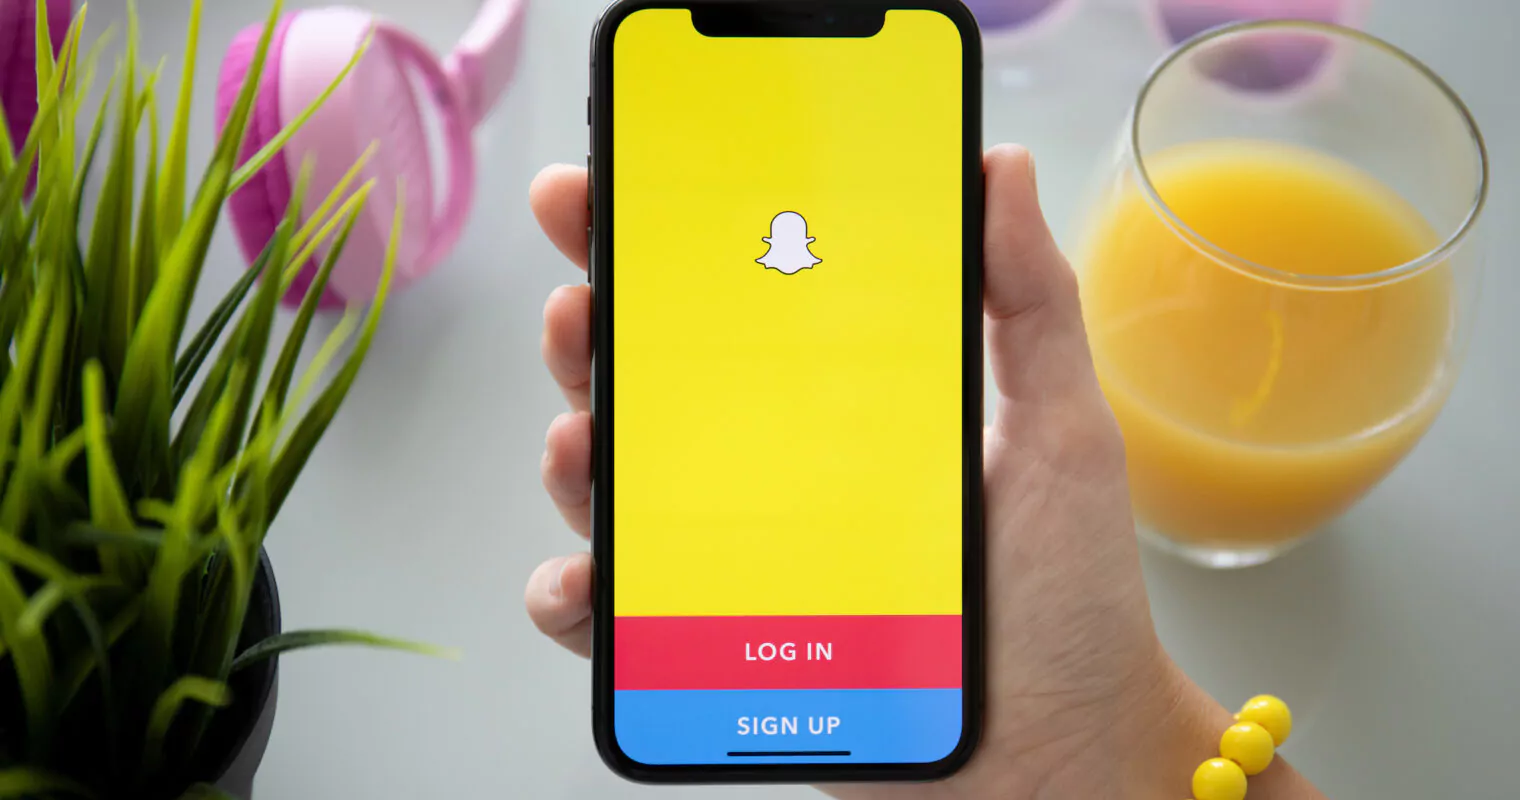 What Does Speak Mean on Snapchat?